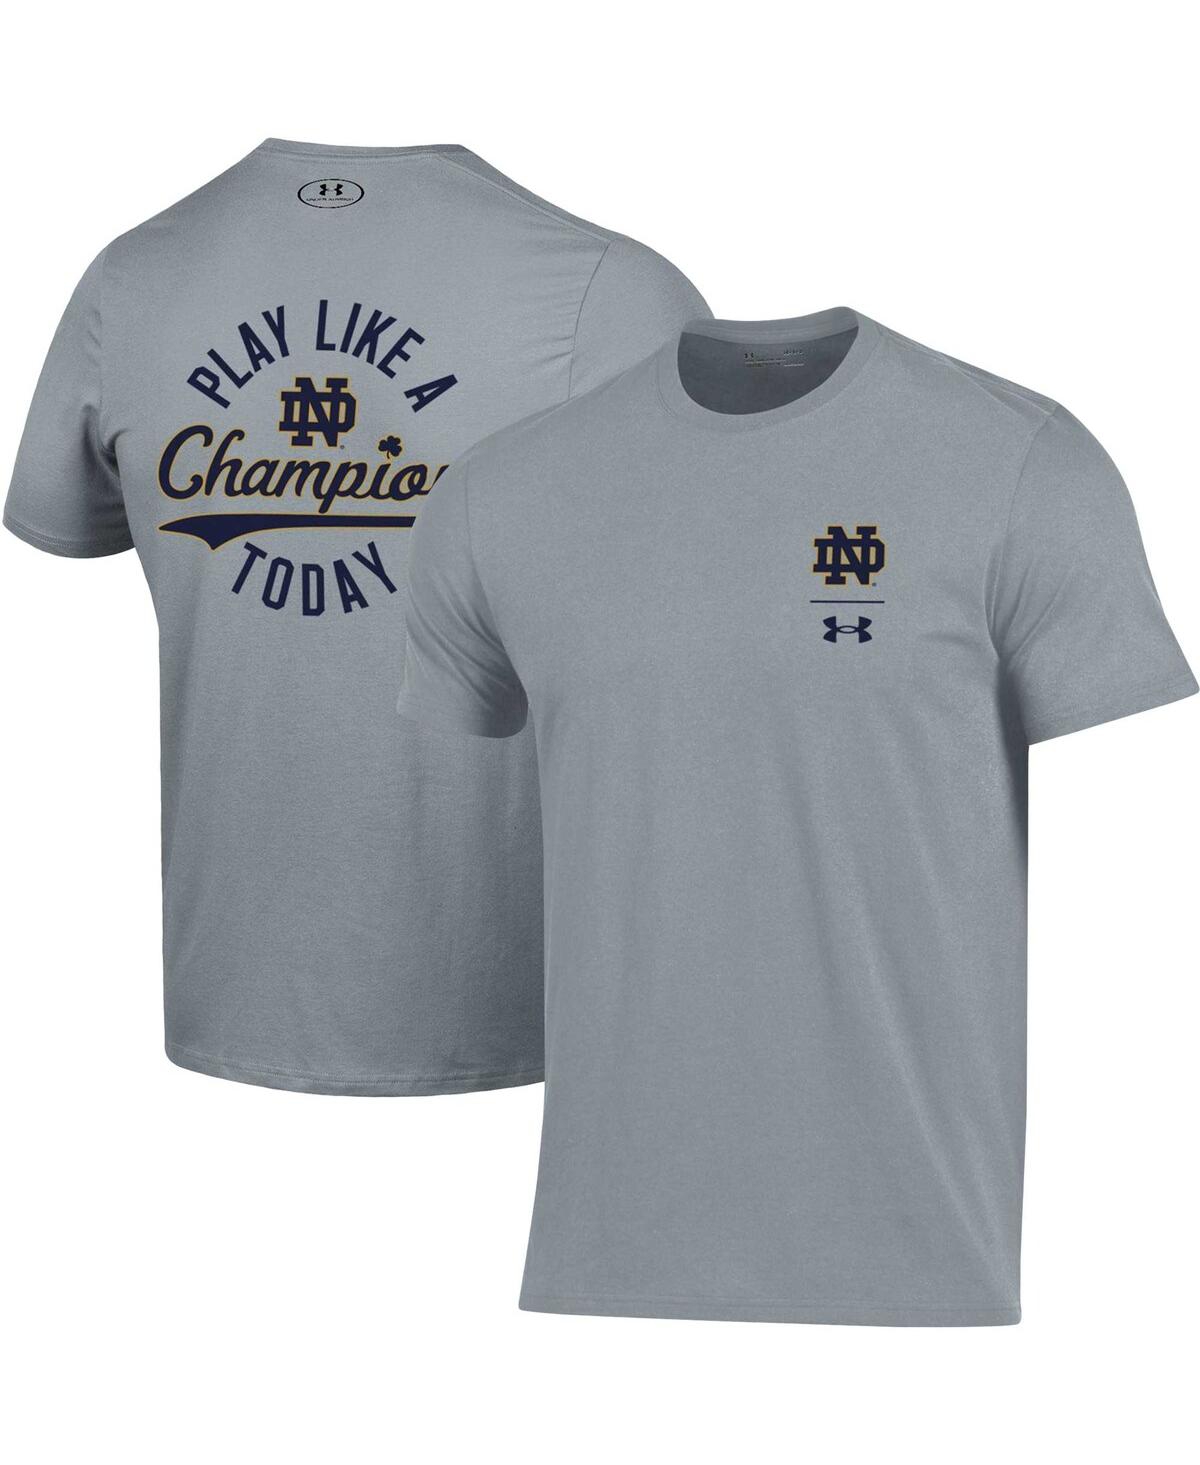 Under Armour Men's  Steel Notre Dame Fighting Irish Play Like A Champion Today T-shirt